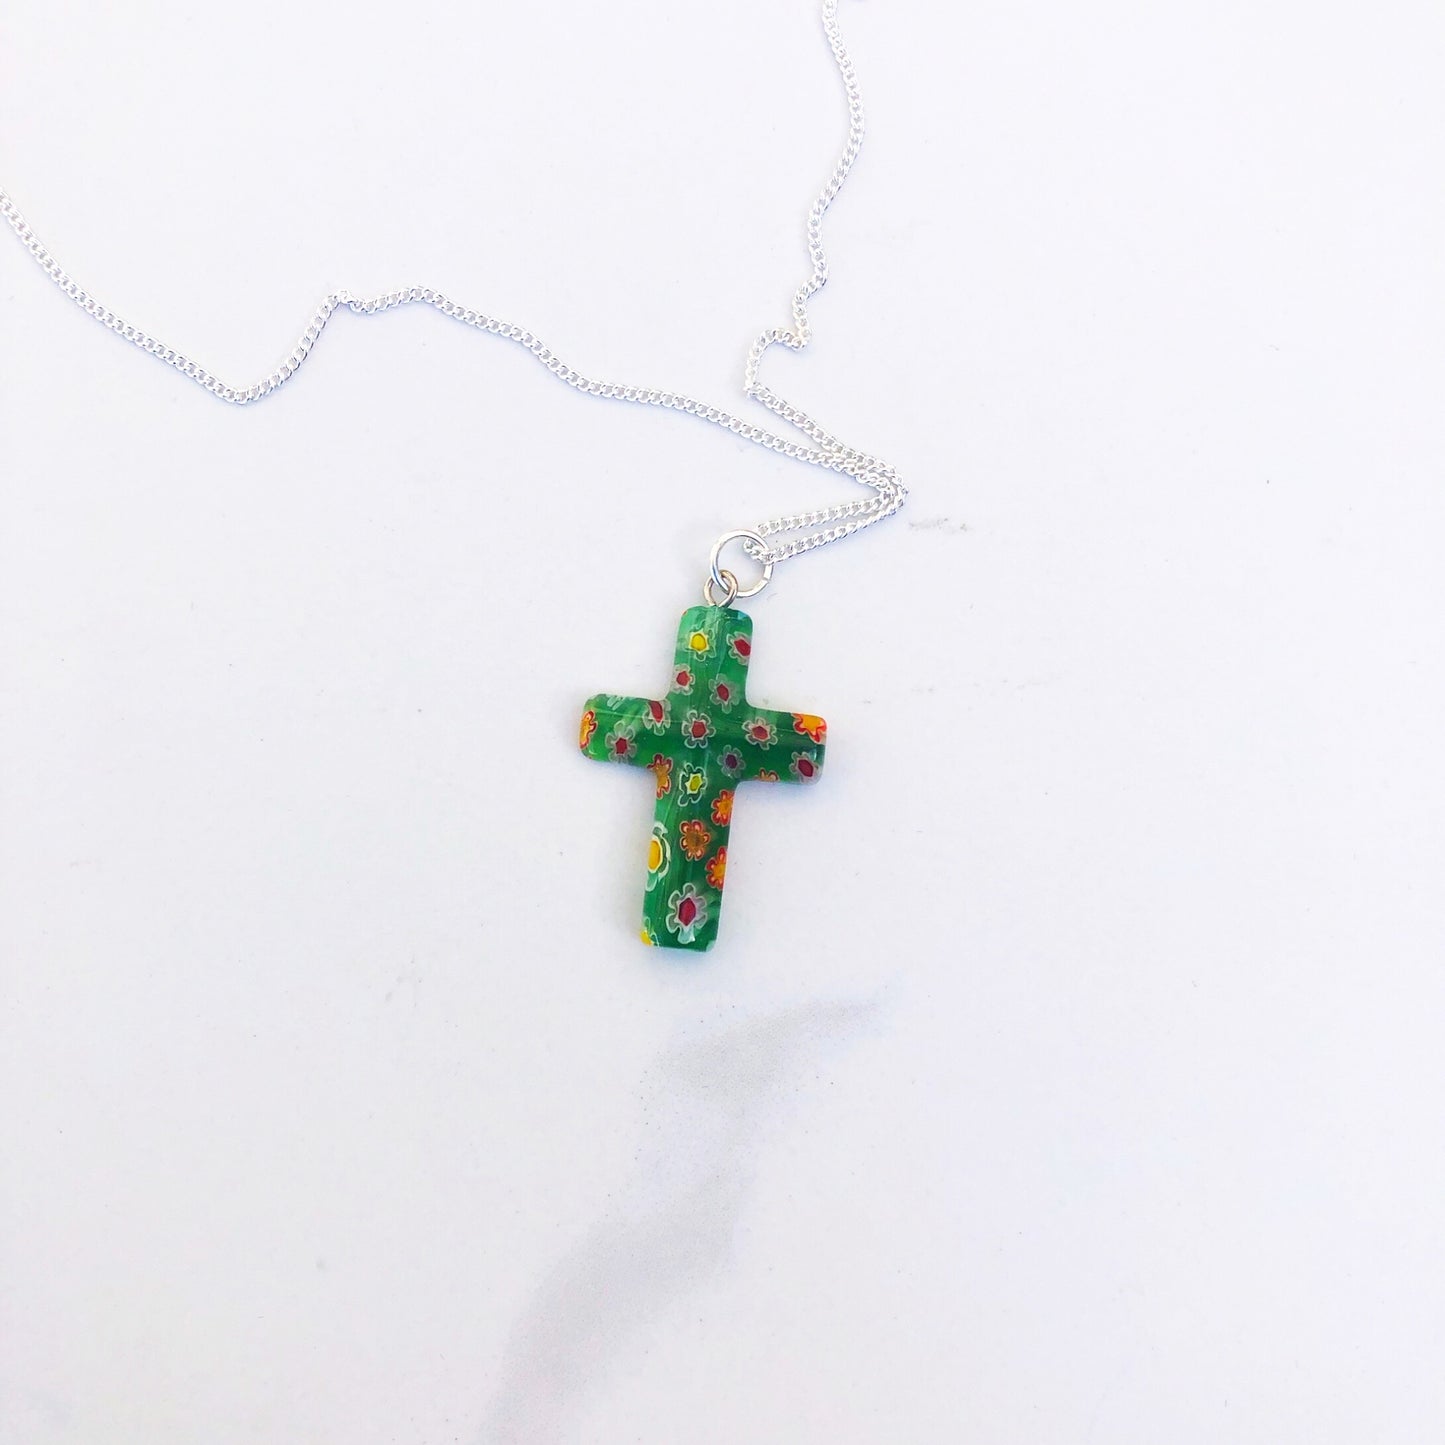 Necklace: Glass Cross Pendant on Silver Chain (Green)